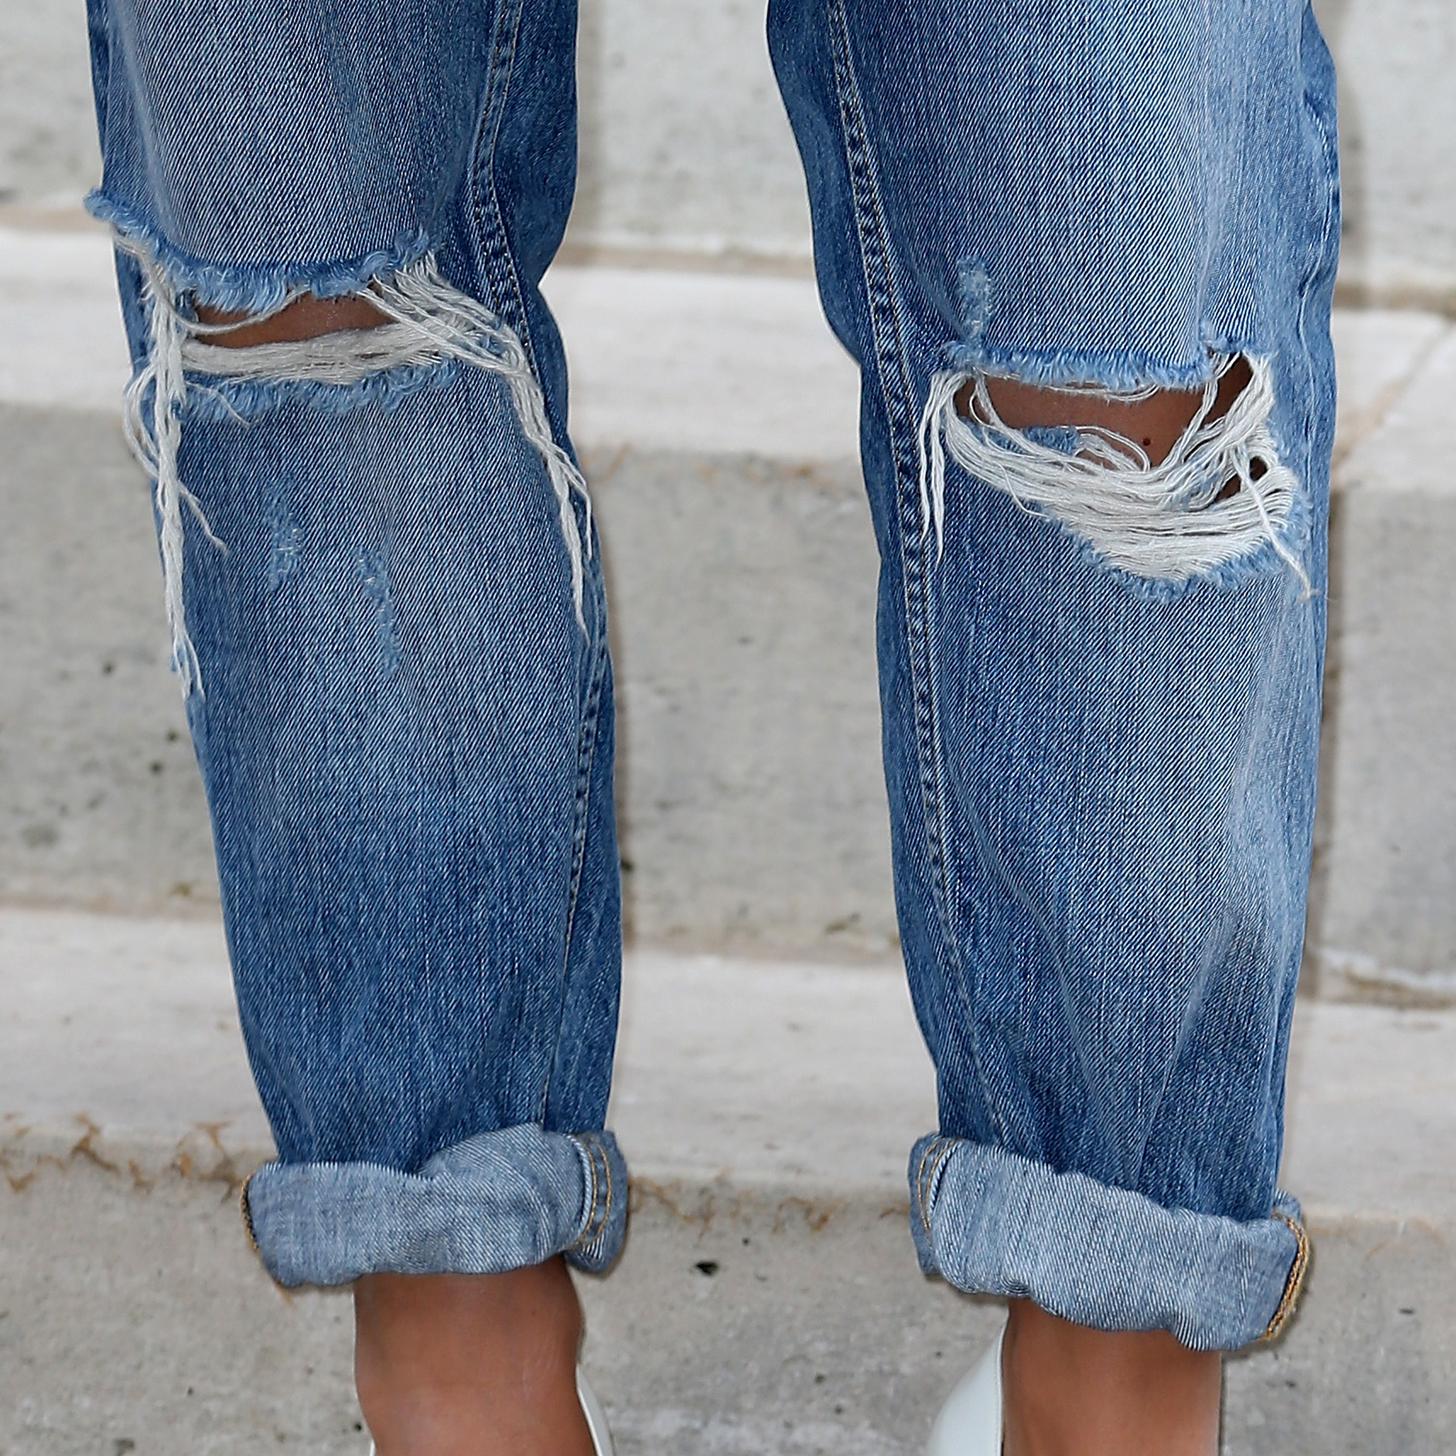 How to Distress Your Denim at Home | Video | POPSUGAR Fashion